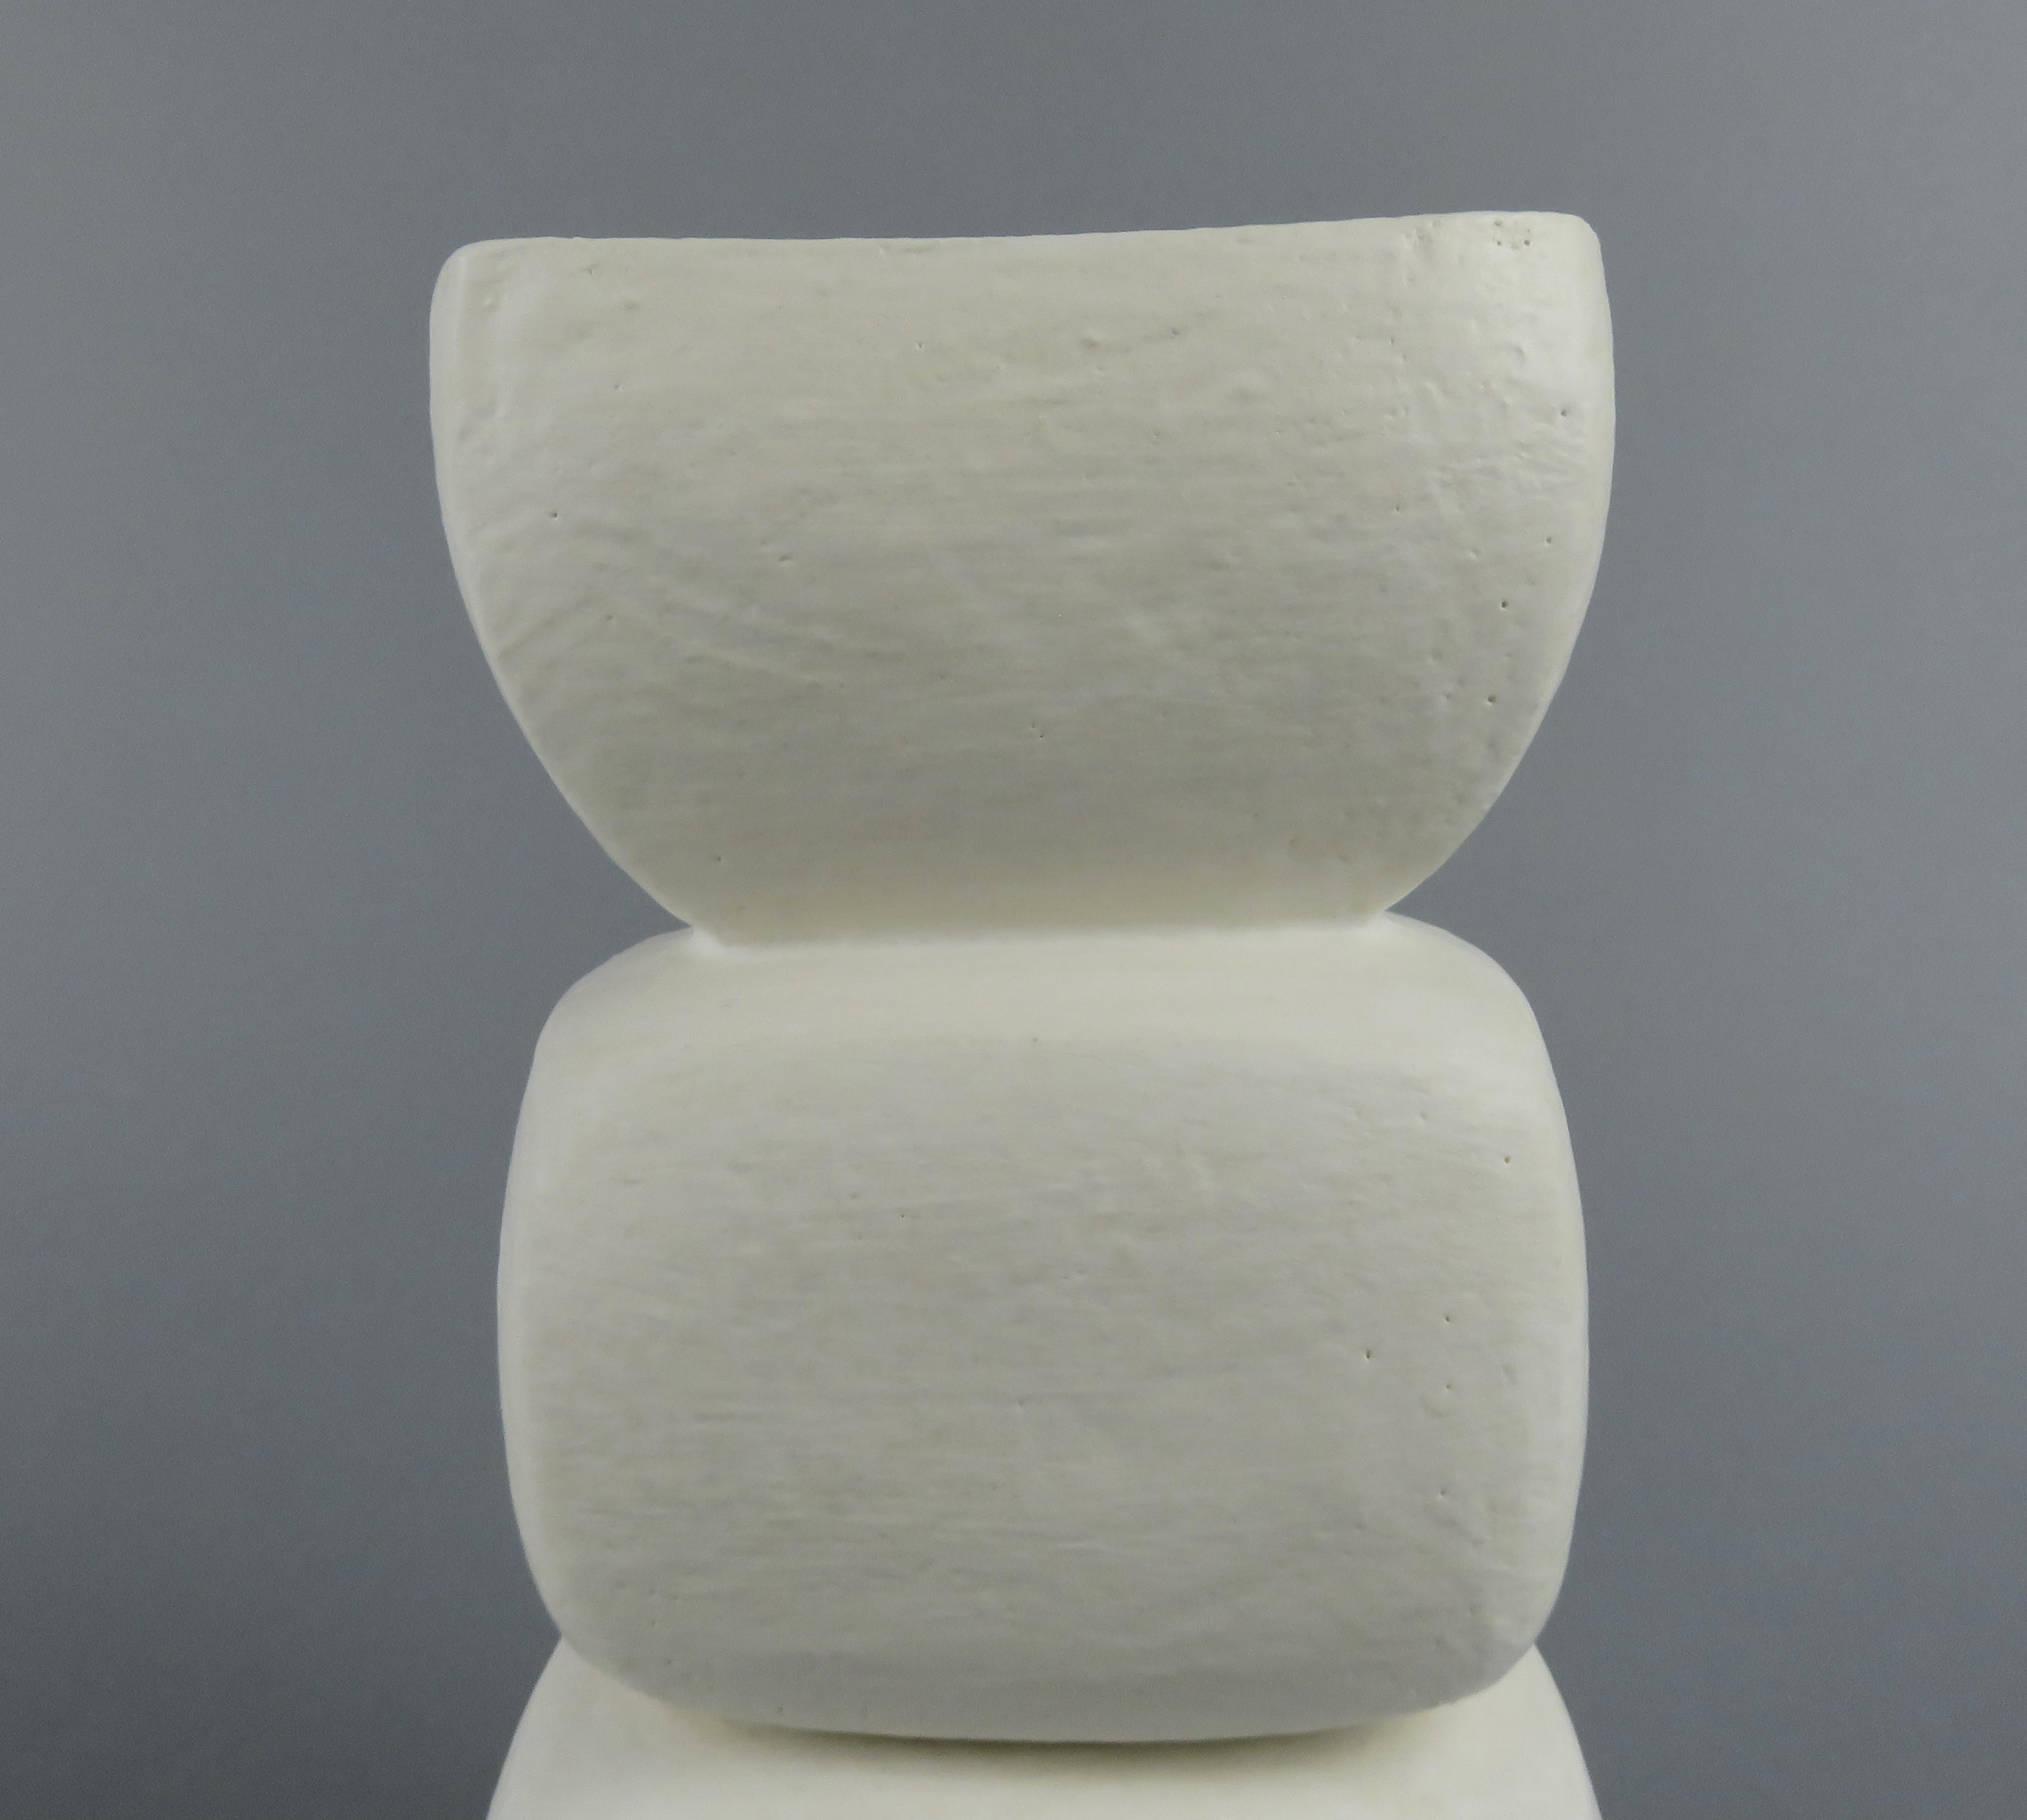 Creamy White 3-Part Totem, Rectangular Cup on Top, Hand Built Ceramic Sculpture For Sale 1